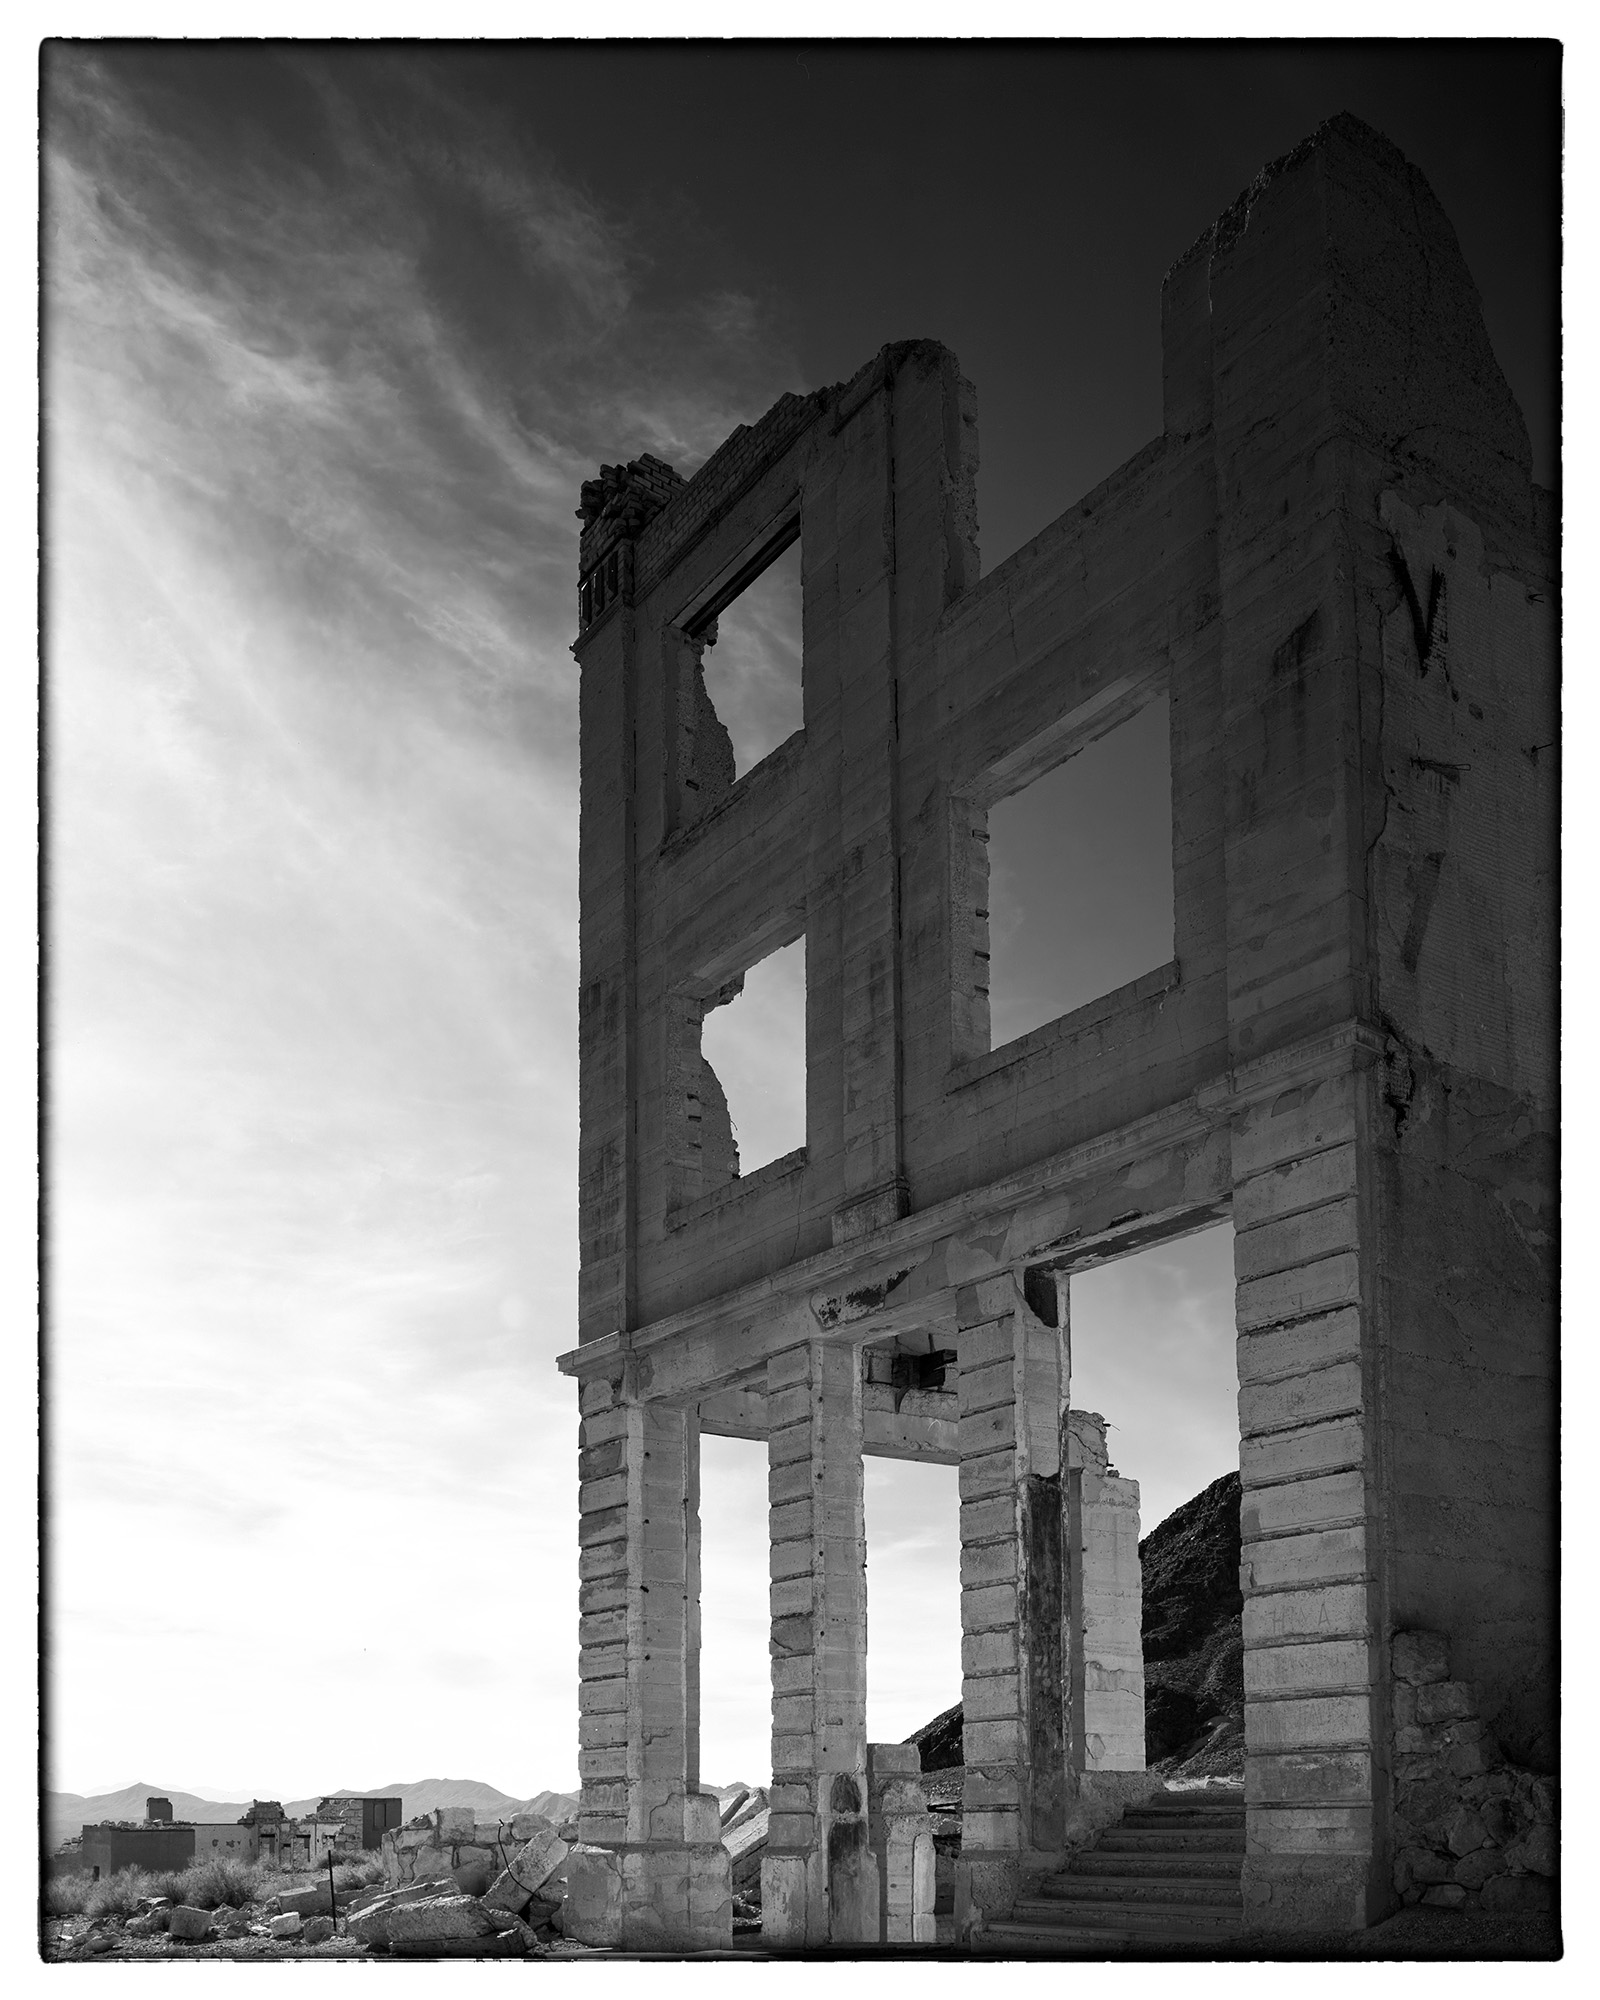 Captured on Kodak TMax film with my Ebony SV45Te View Camera, this vertical image offers a haunting glimpse of Rhyolite, Nevada...